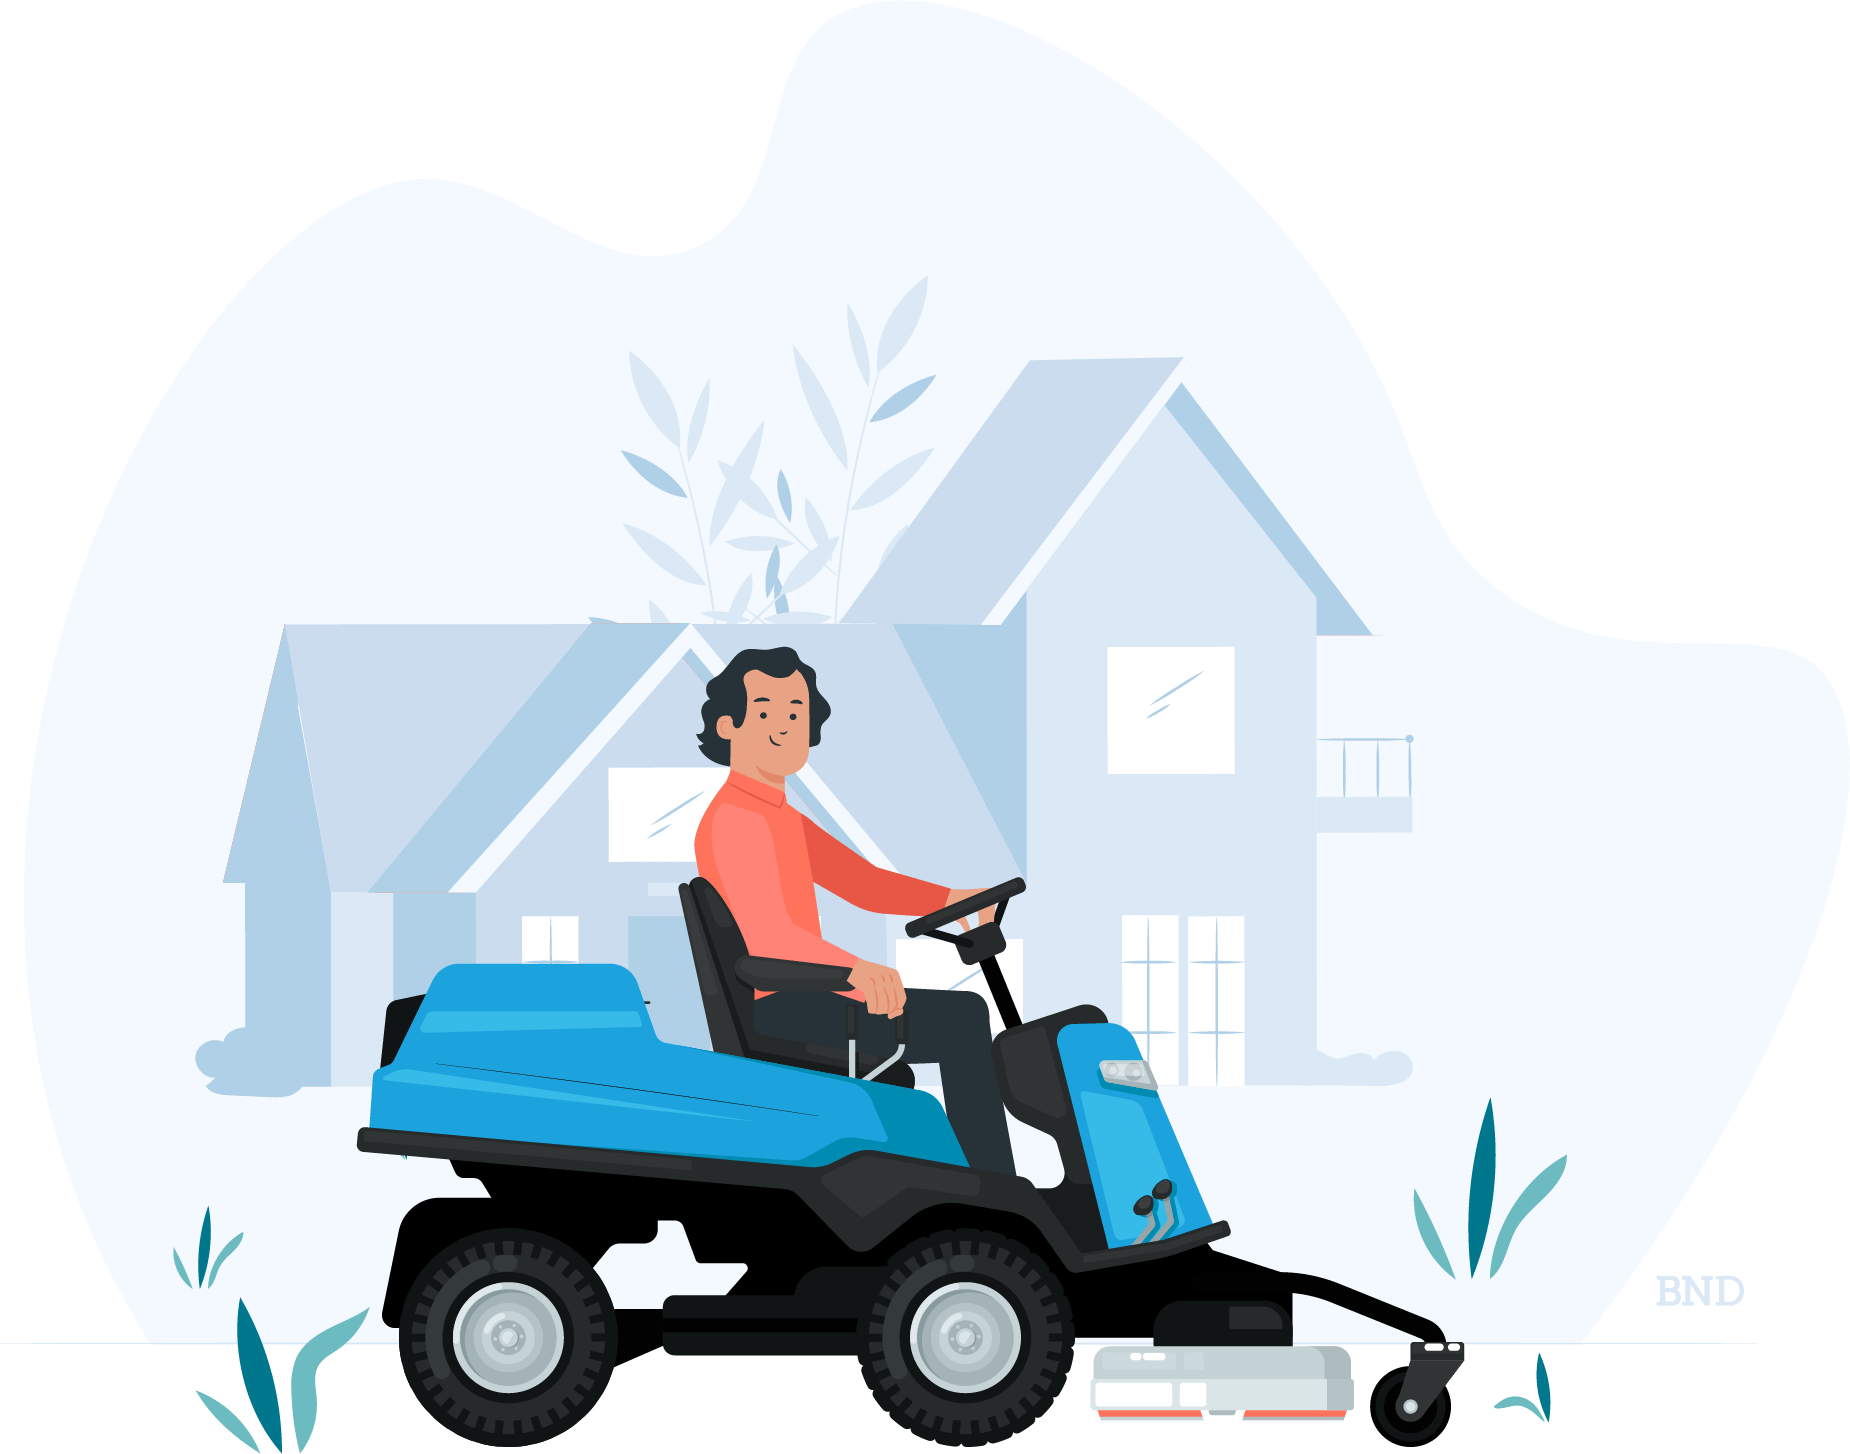 graphic of a person using a riding lawnmower